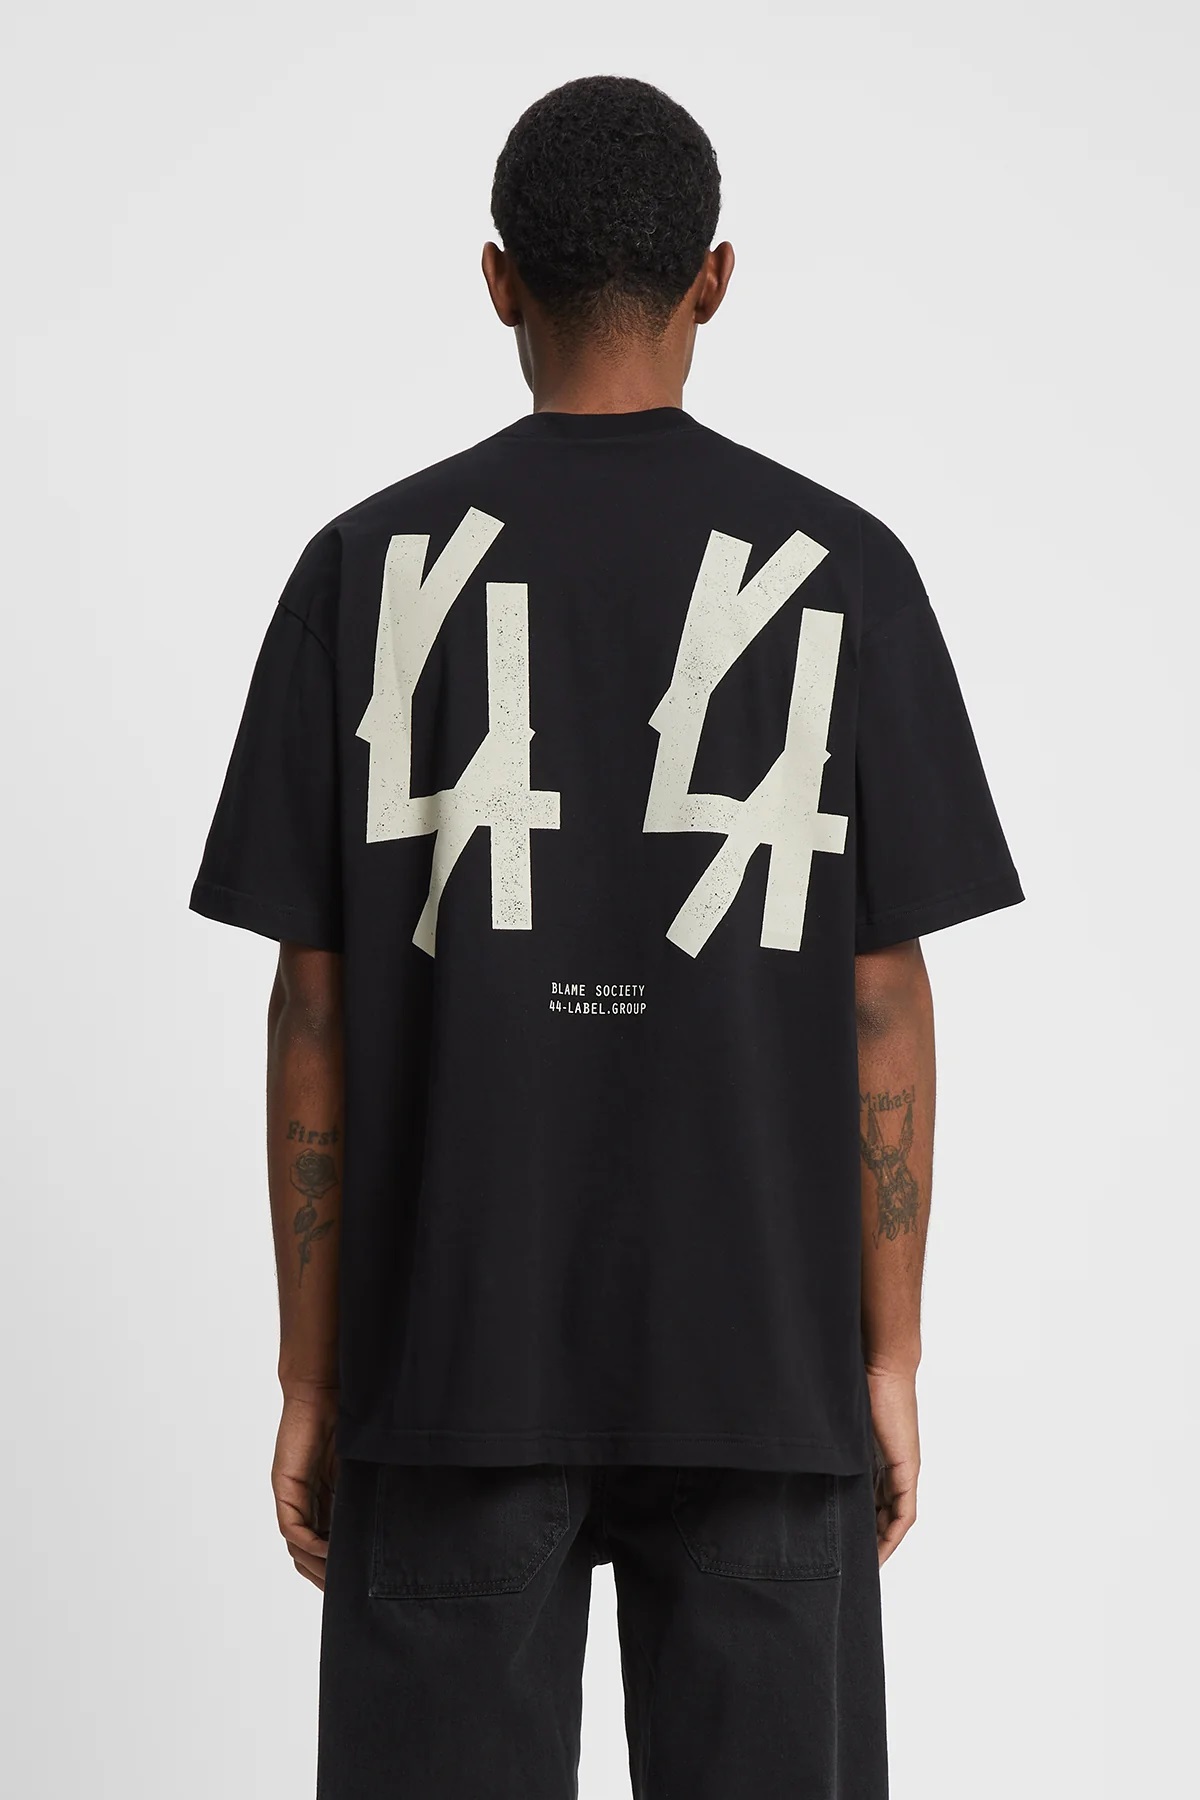 44 LABEL GROUP Backstage T-Shirt in Black XL